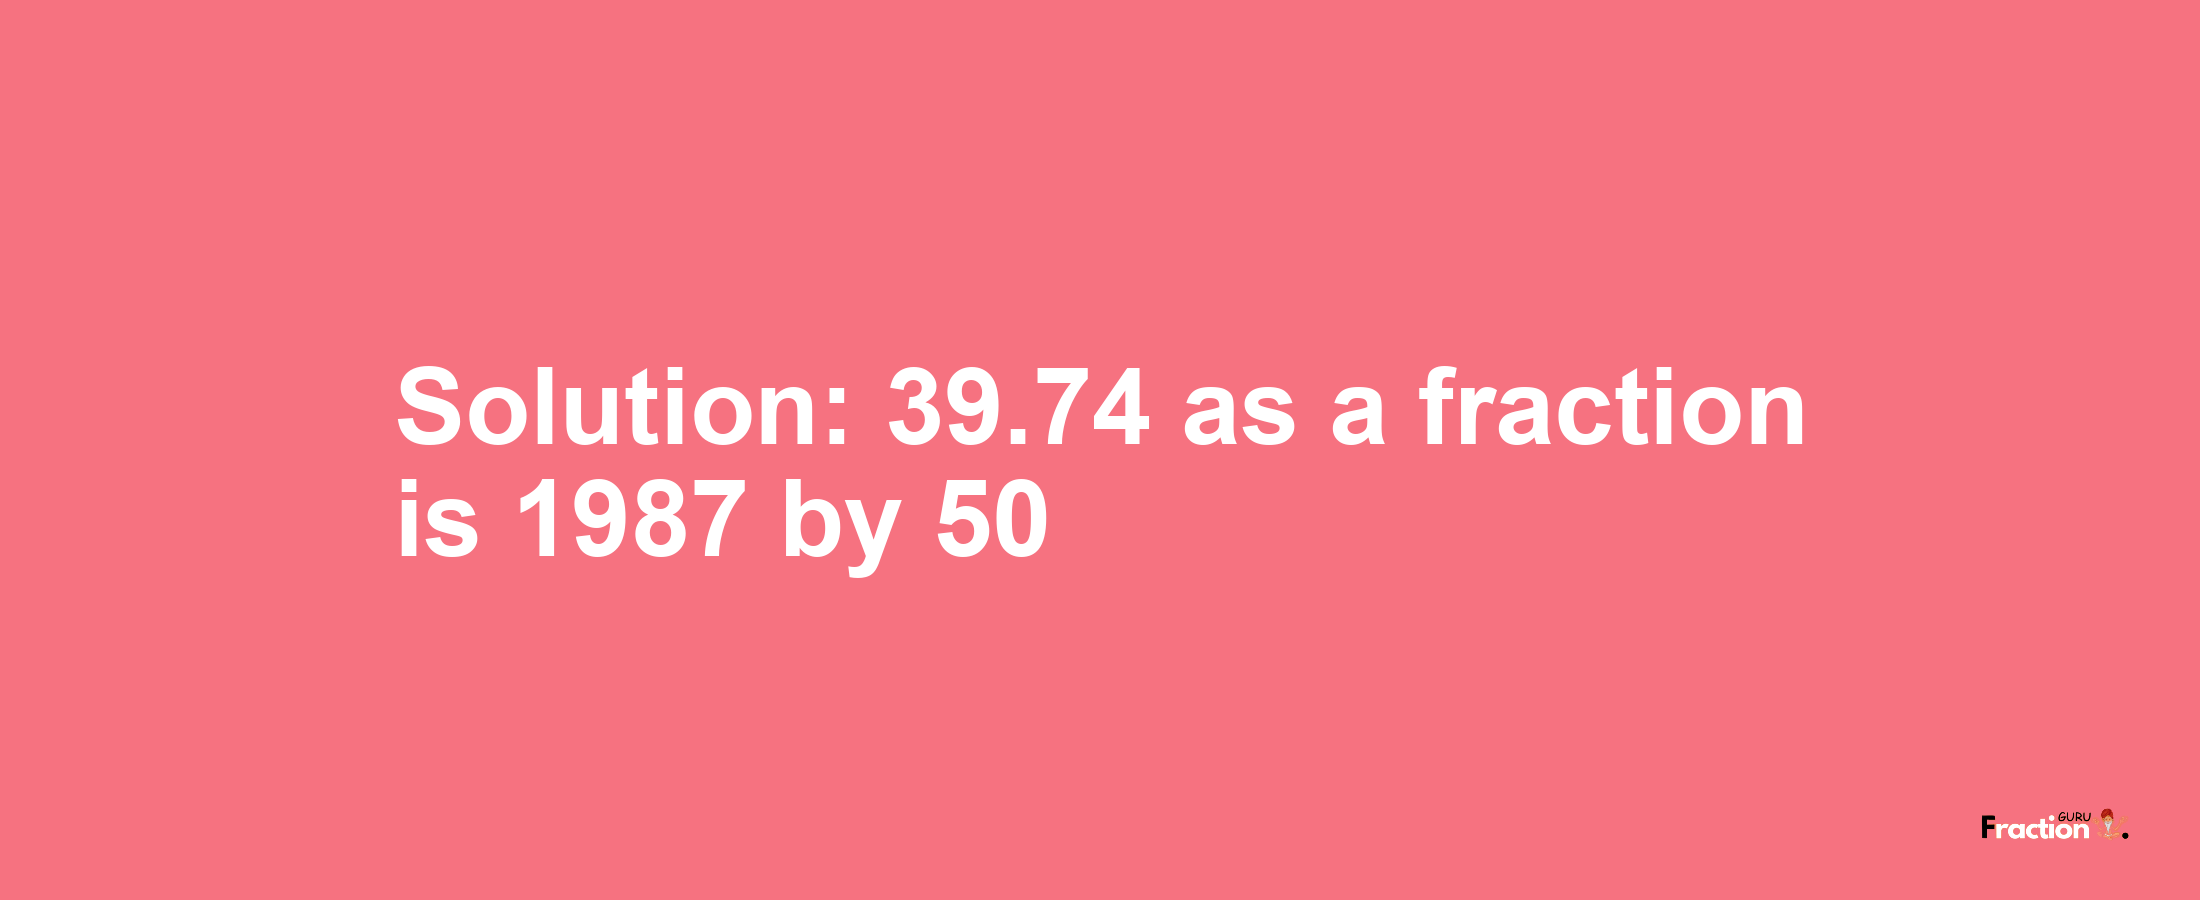 Solution:39.74 as a fraction is 1987/50